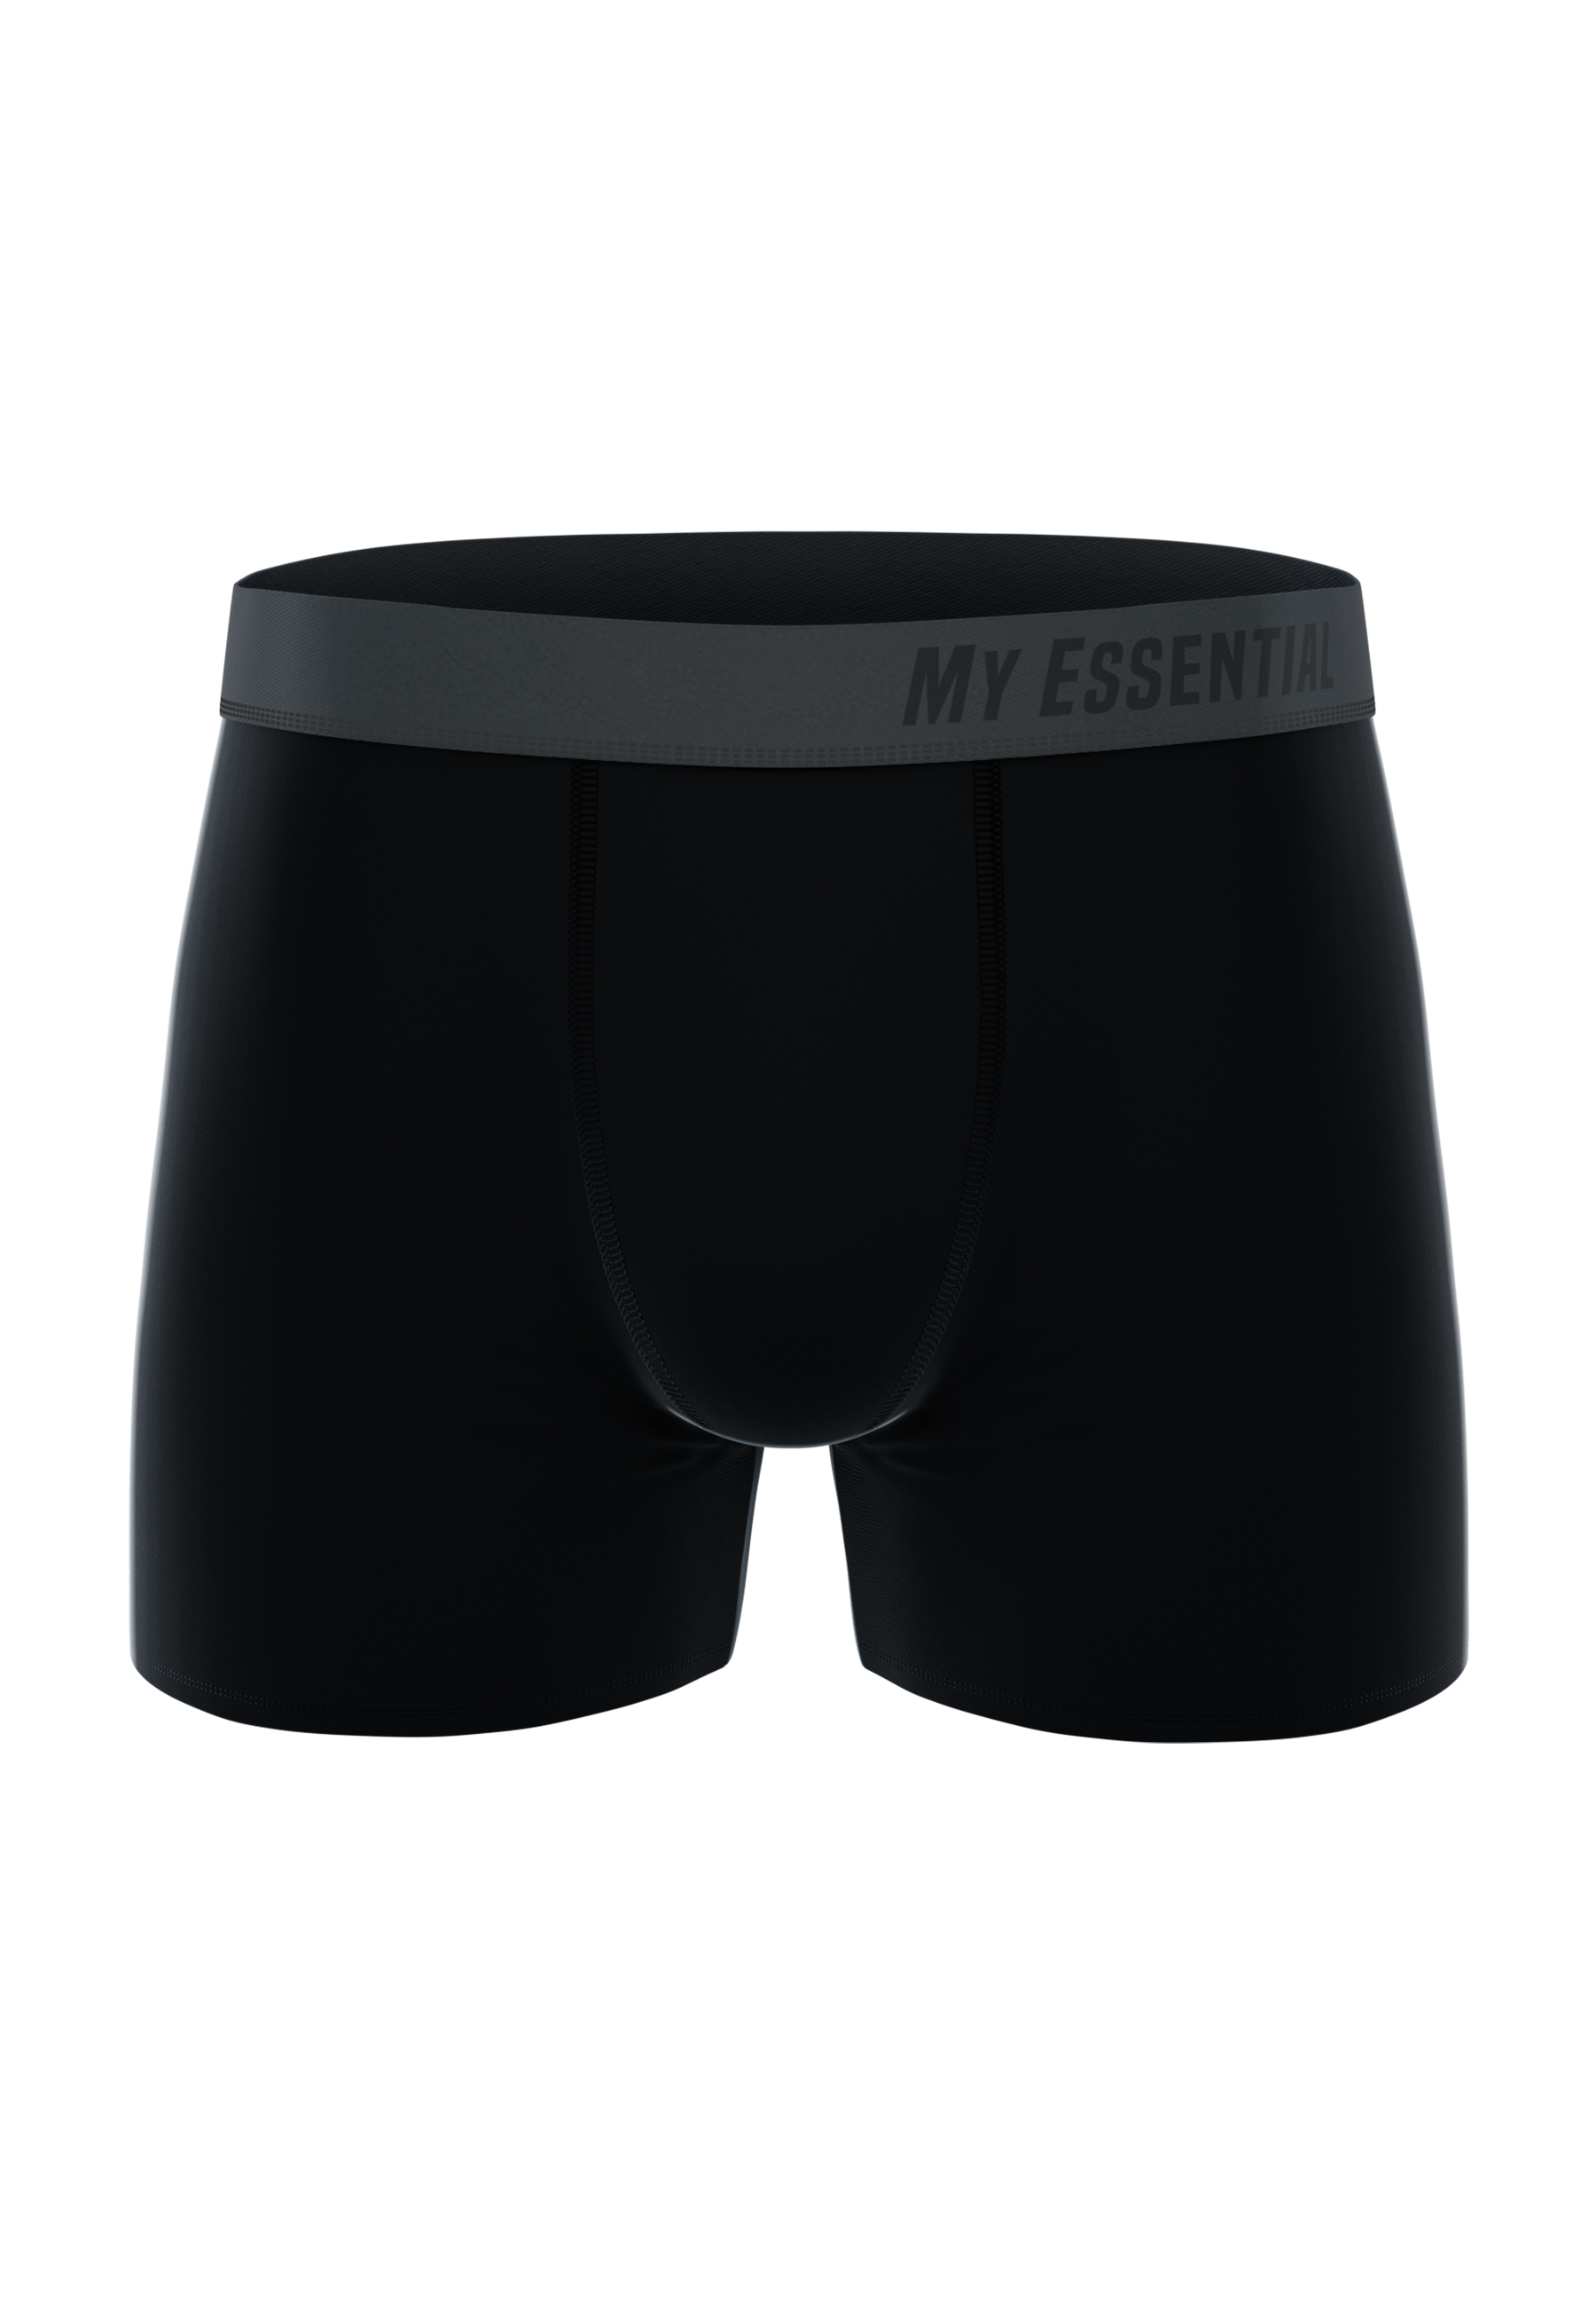 MY ESSENTIAL CLOTHING 3-Pack Boxershorts all black XXL